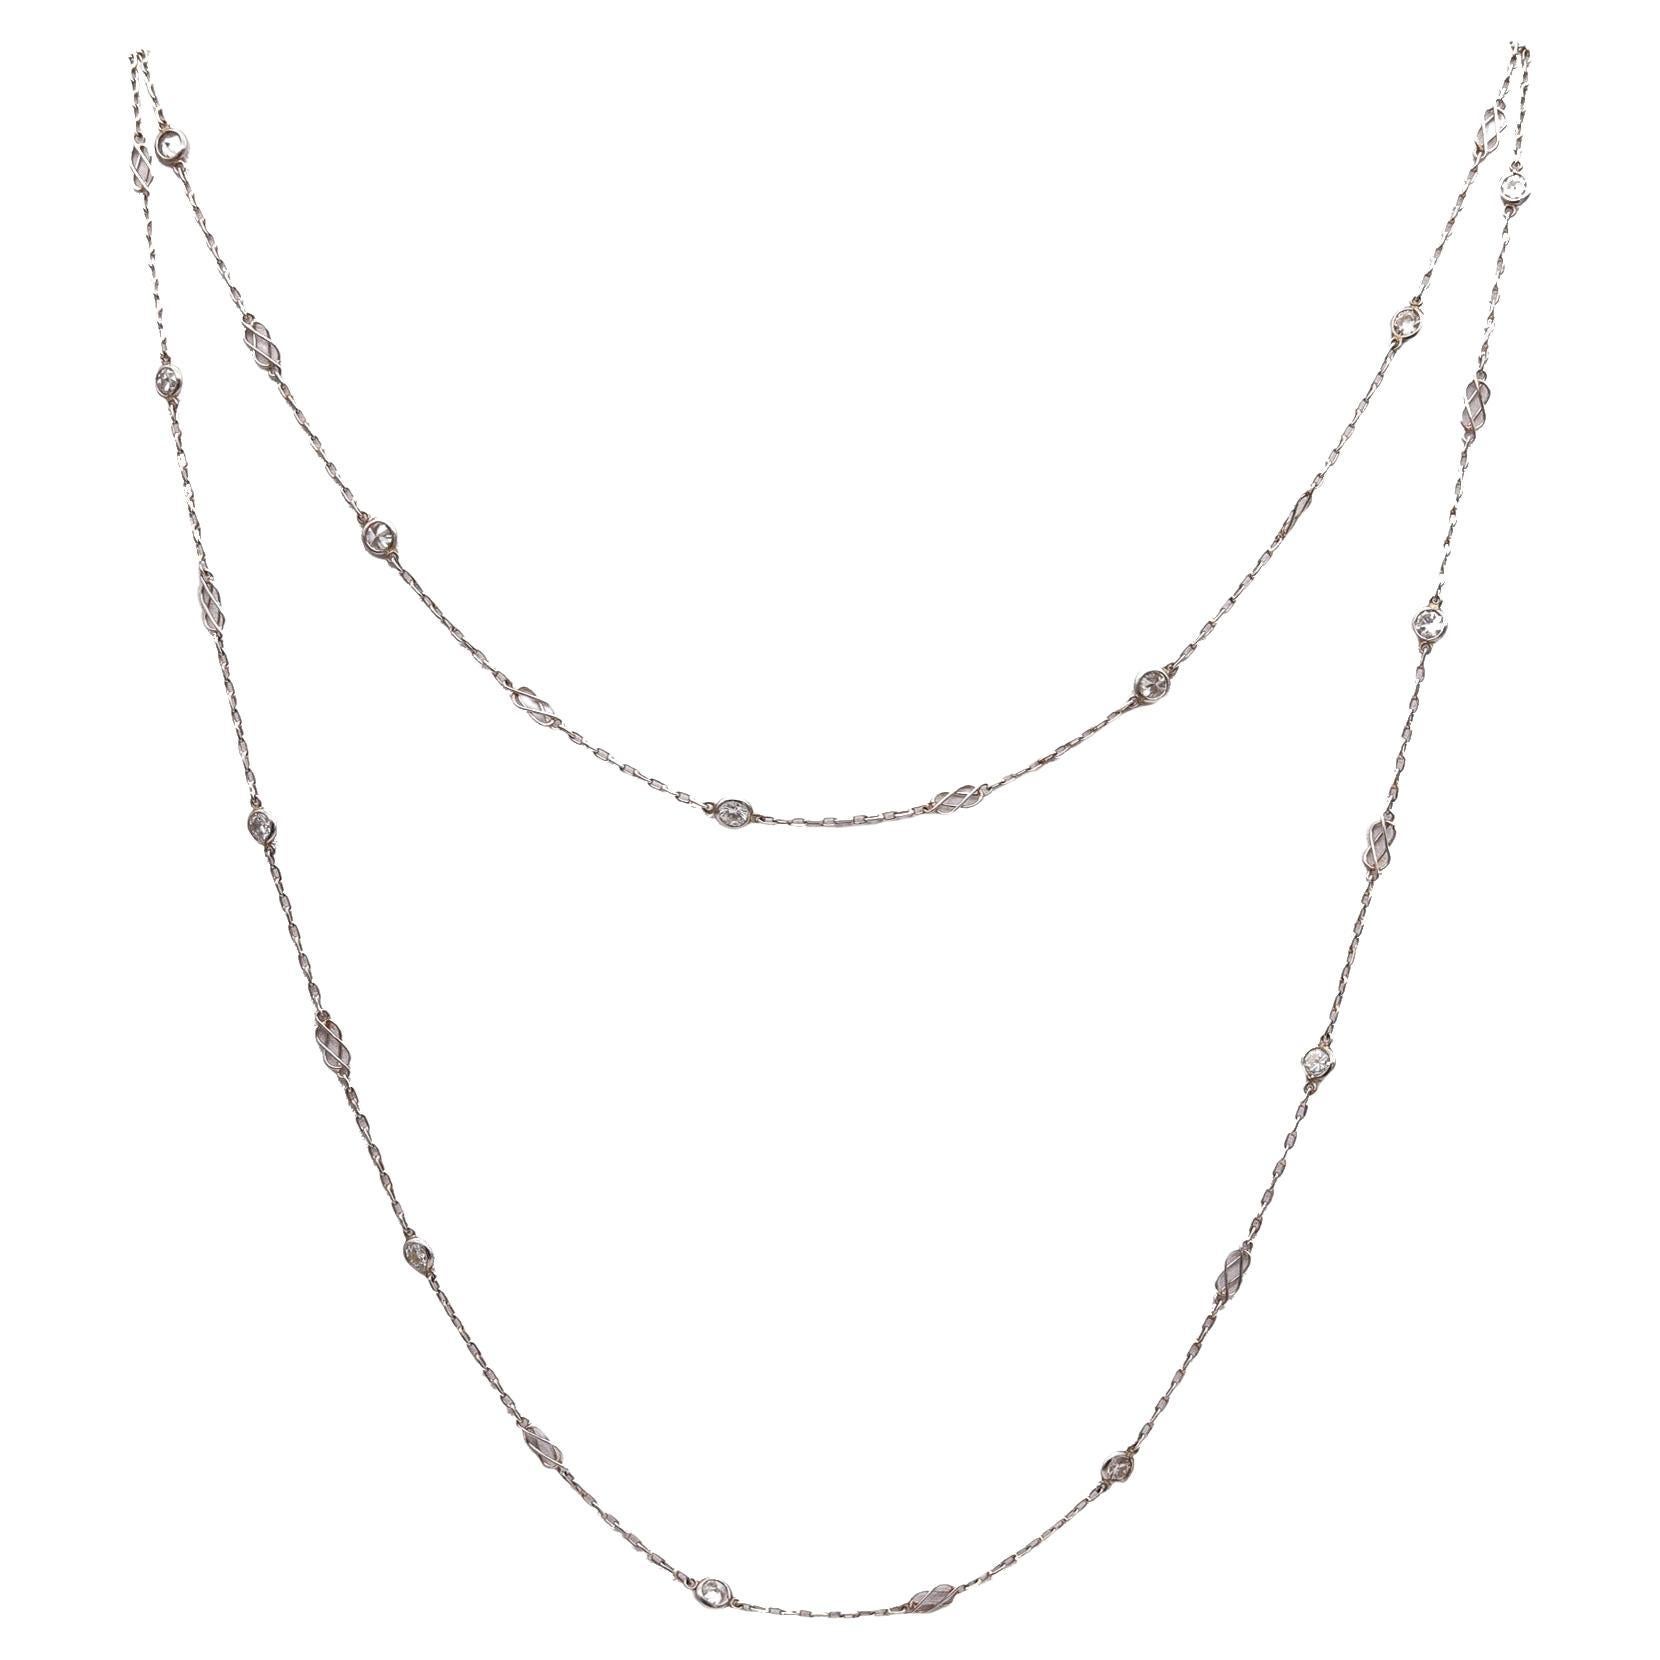 Art Deco 1930 Stations Long Chain Necklace In Platinum With 2.75 Ctw In Diamonds